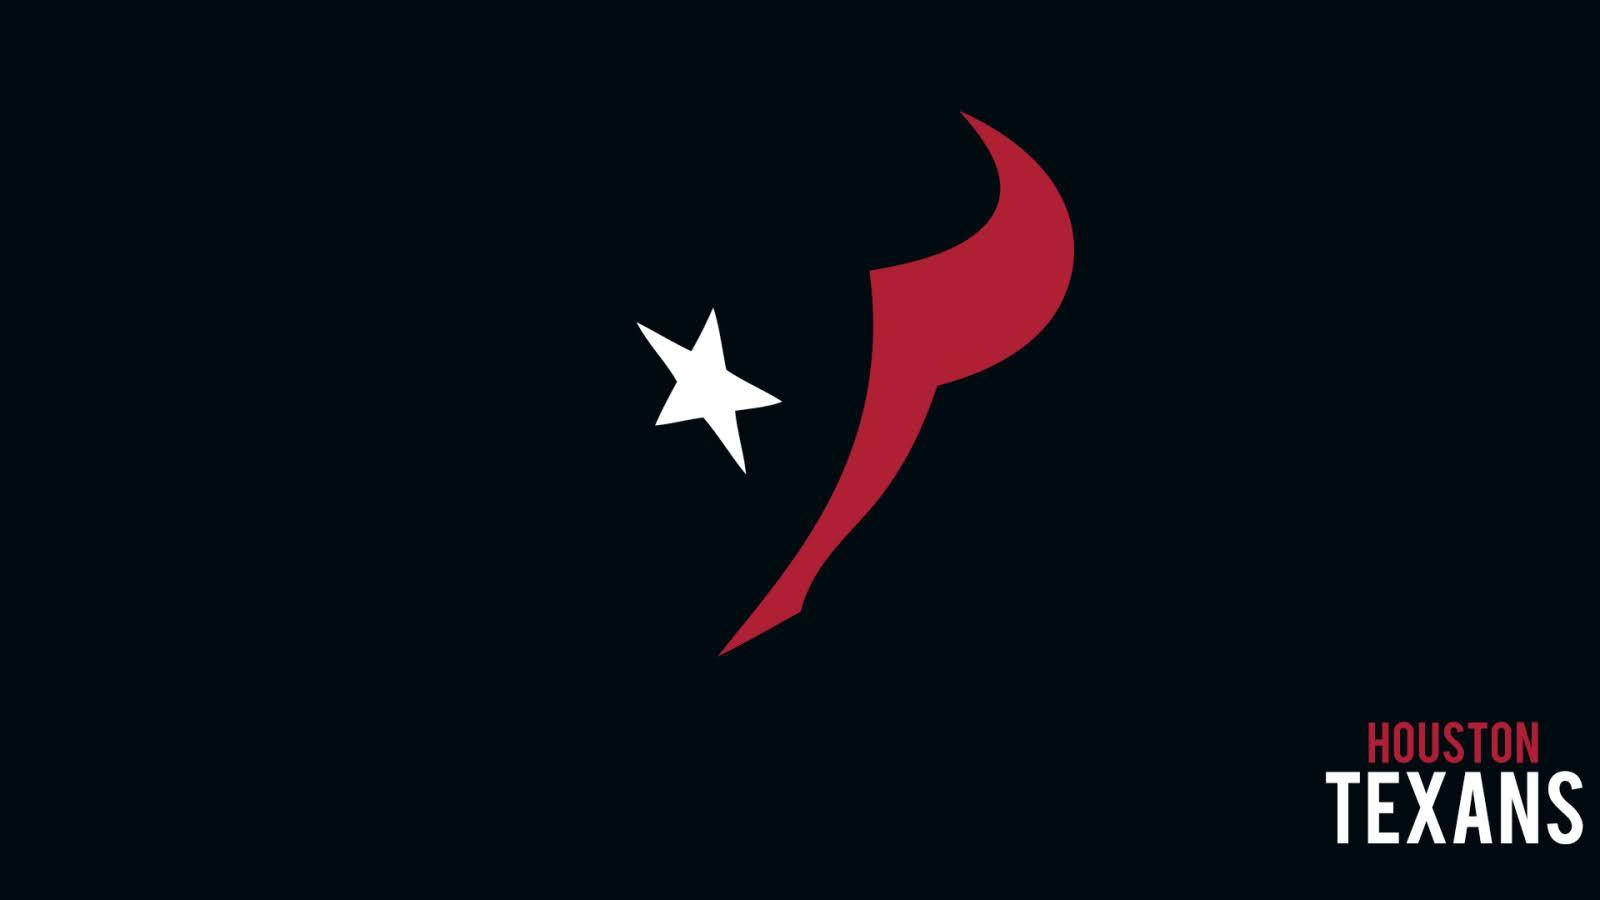 Gear up for game day as the Houston Texans take the field. Wallpaper